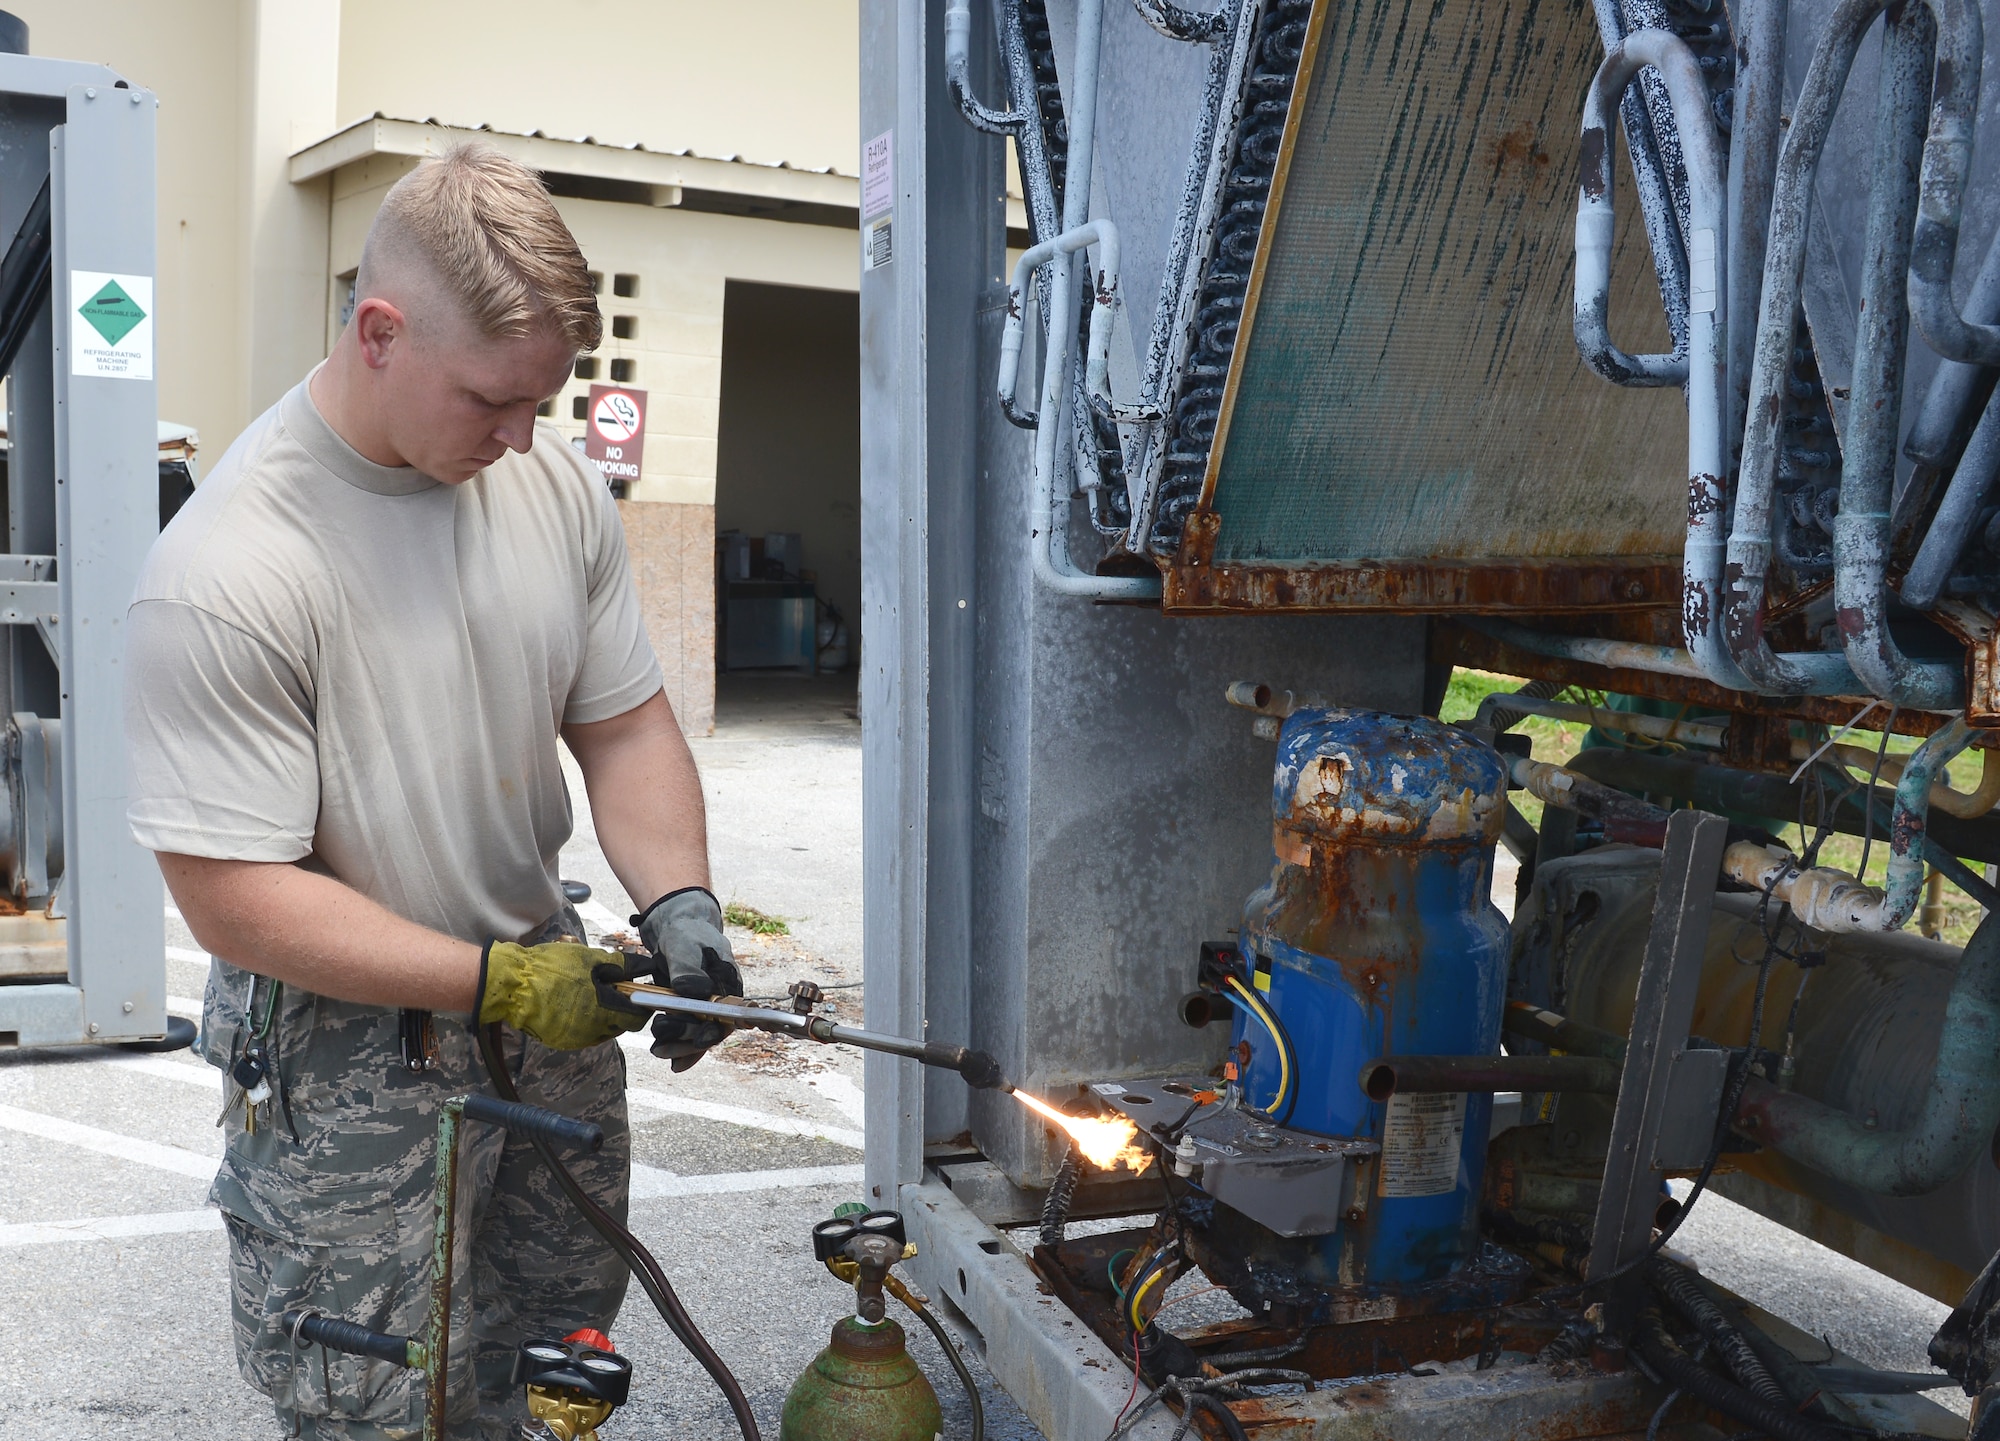 Staff Sgt. Ricky Kranning, 36th Civil Engineer Squadron heating, ventilation and air conditioning technician, uses a cutting torch to cut compressors out of a unit March 11, 2015, at Andersen Air Force Base, Guam. The mission of the HVAC Flight is to install, maintain, and repair different systems on base. (U.S. Air Force photo by Airman 1st Class Arielle Vasquez/Released)